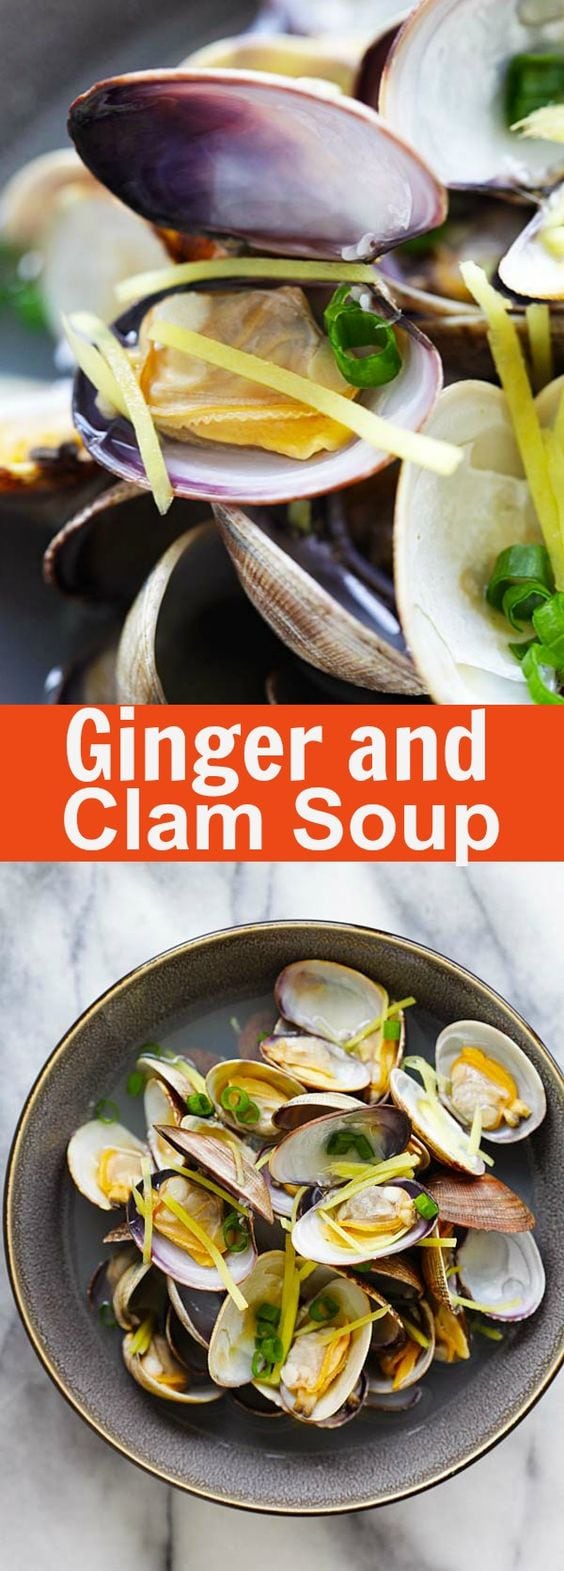 Ginger and Clam Soup - Nourishing Chinese style soup with clams and lots of ginger. This soup is absolutely delightful and so easy to make | rasamalaysia.com